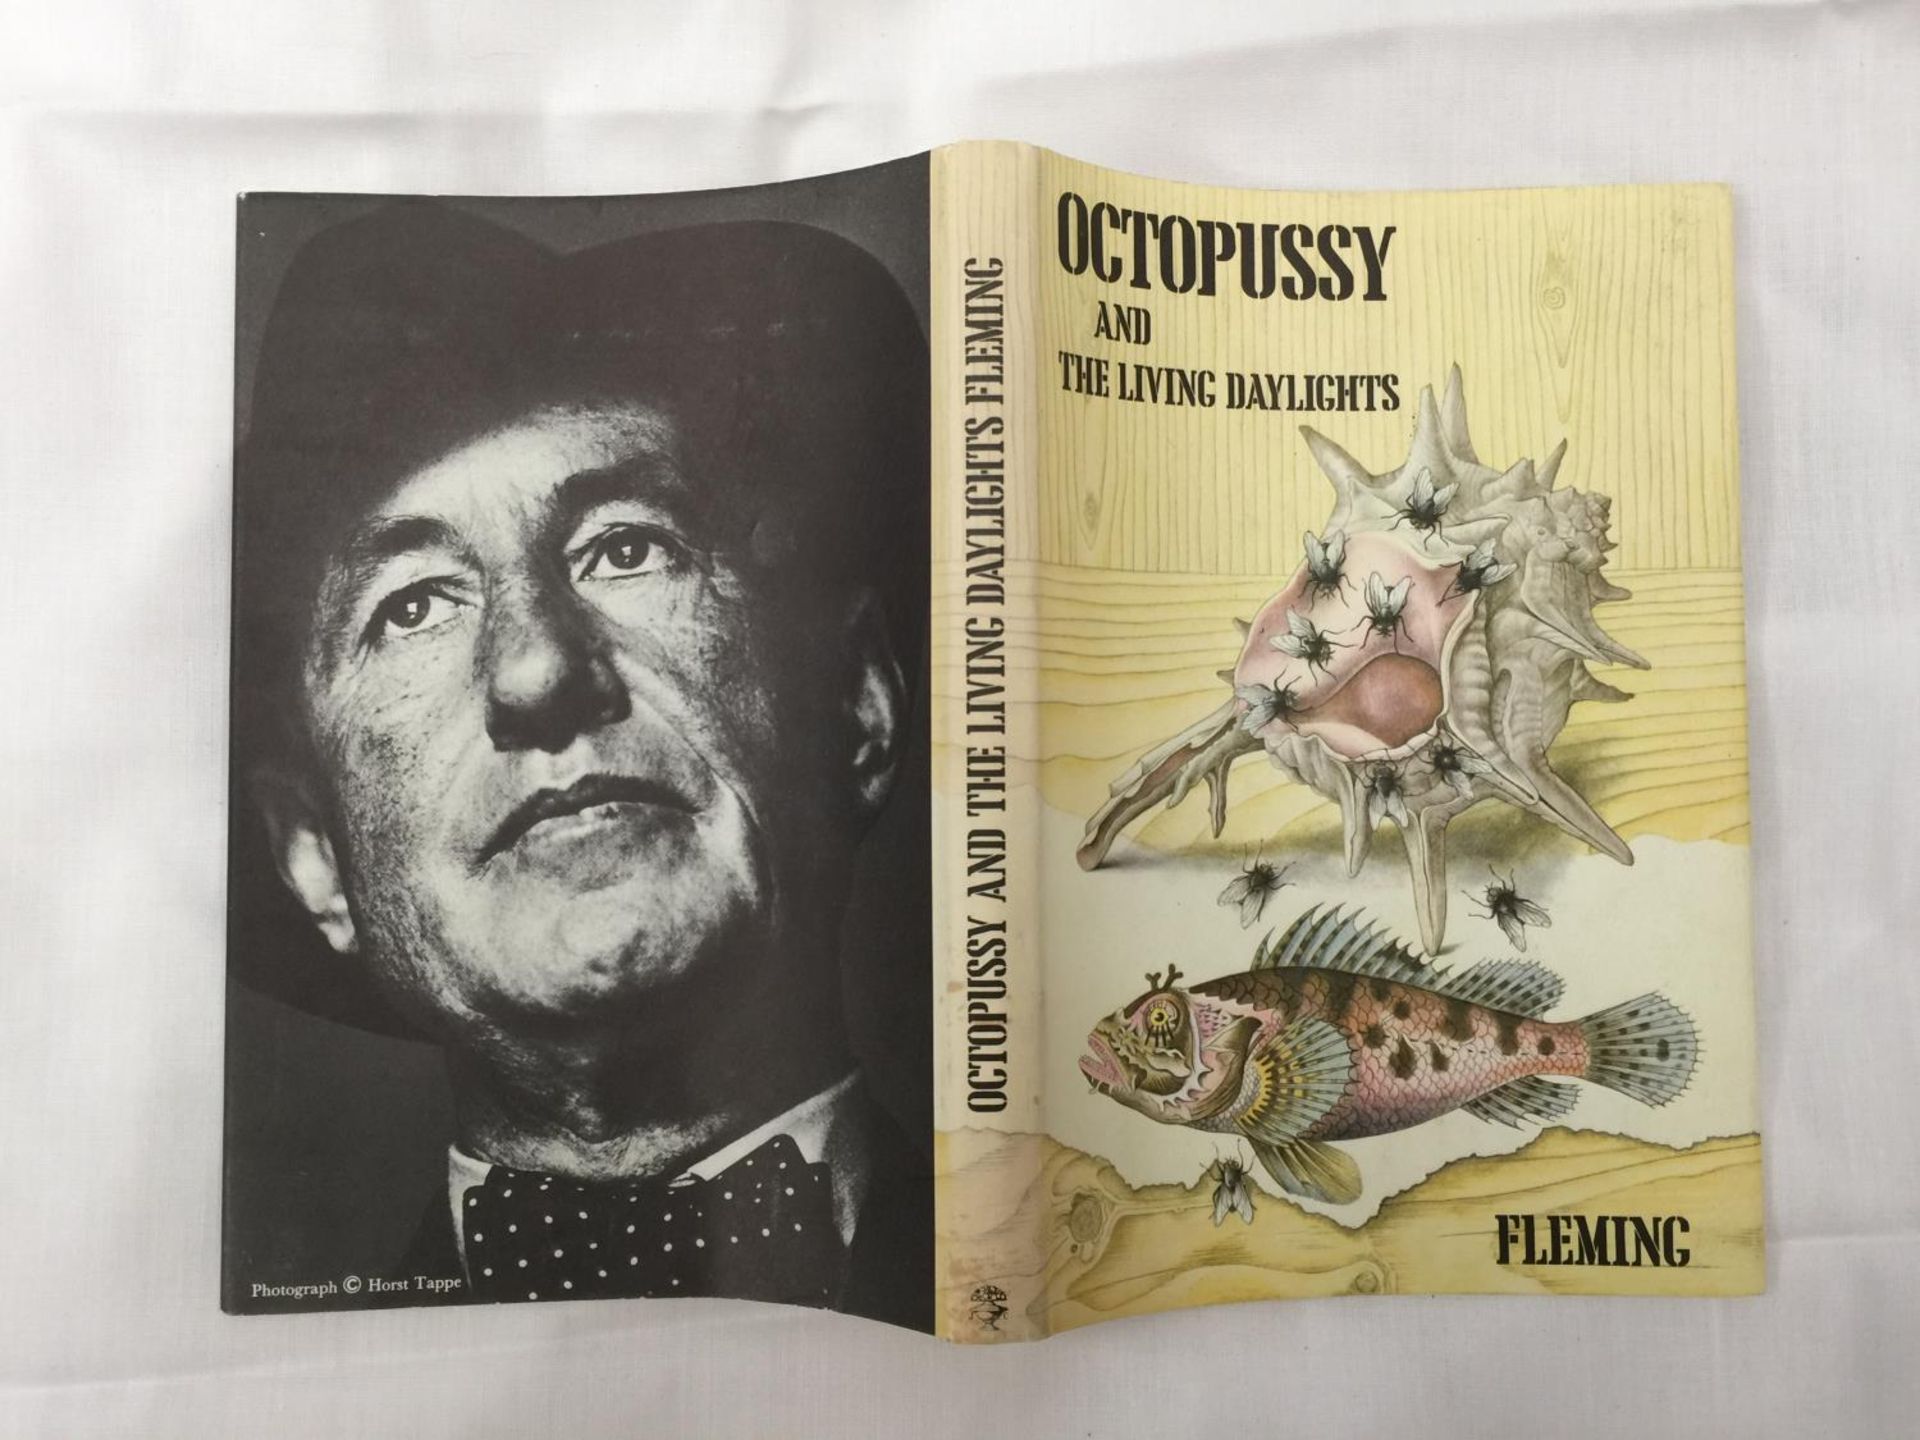 A FIRST EDITION JAMES BOND NOVEL - OCTOPUSSY AND THE LIVING DAYLIGHTS BY IAN FLEMING, HARDBACK - Image 11 of 11